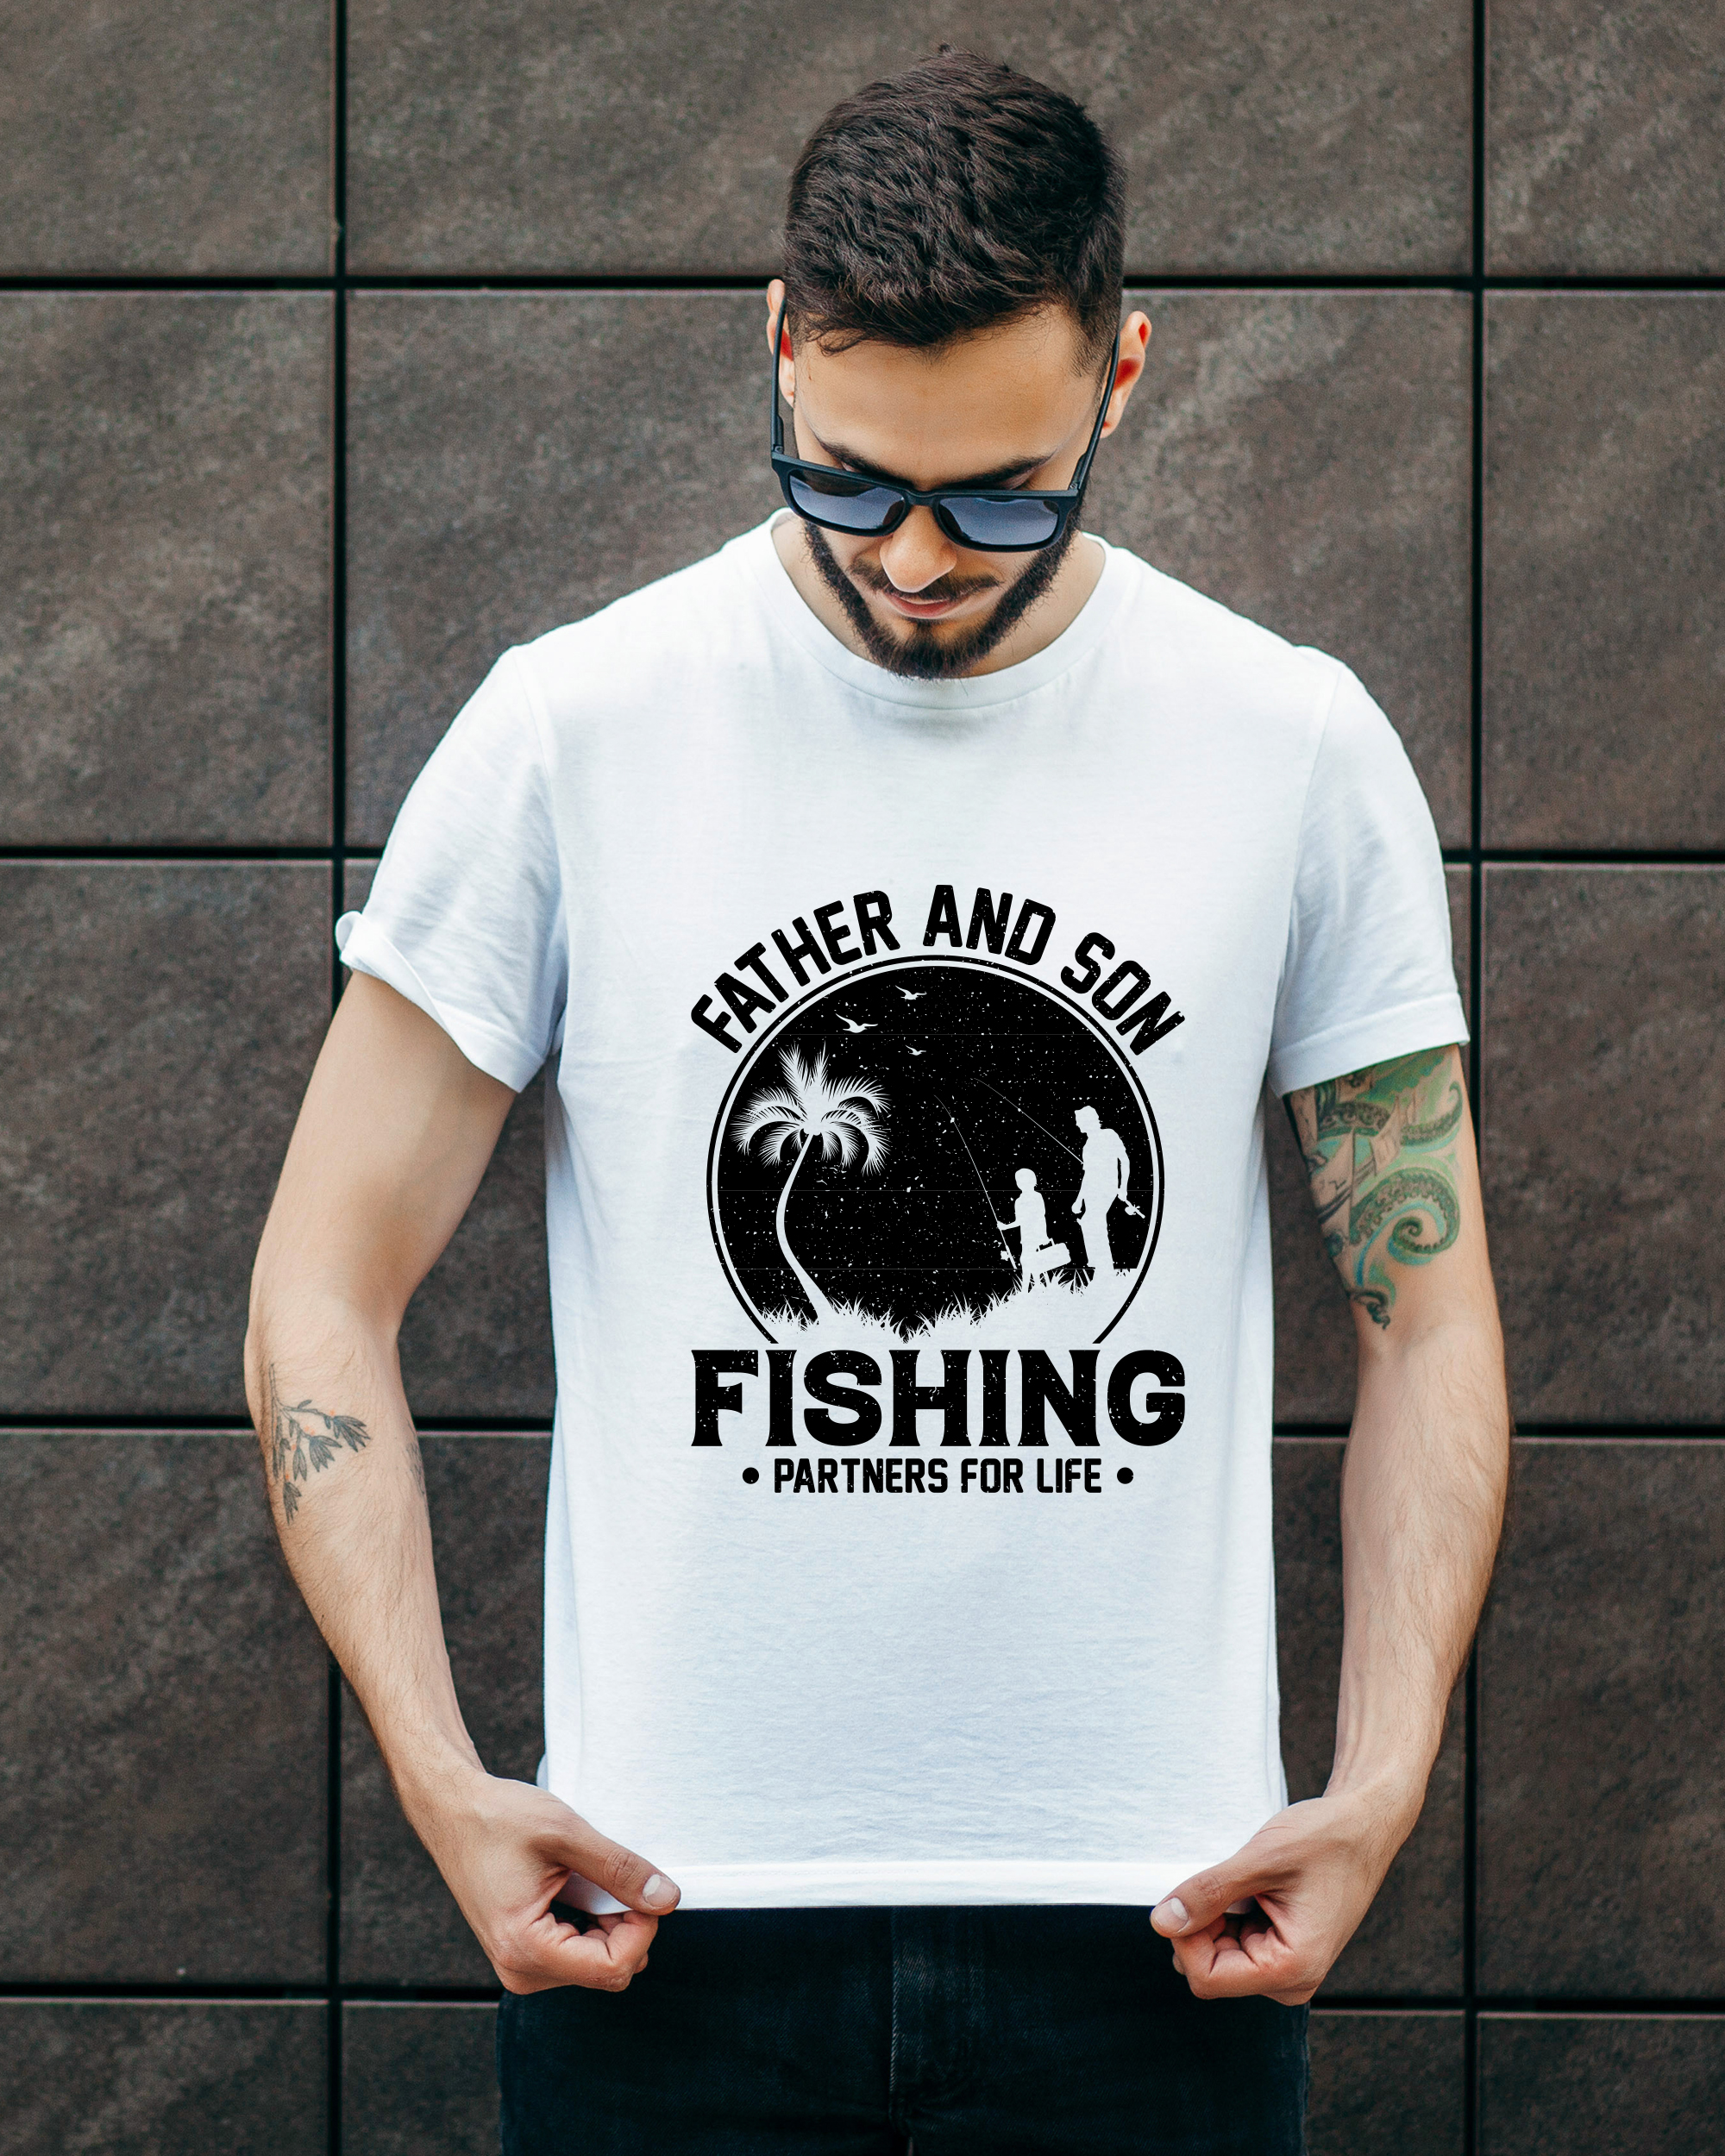 Men's Round Neck White Father and Son Fishing Printed Cotton T-shirt